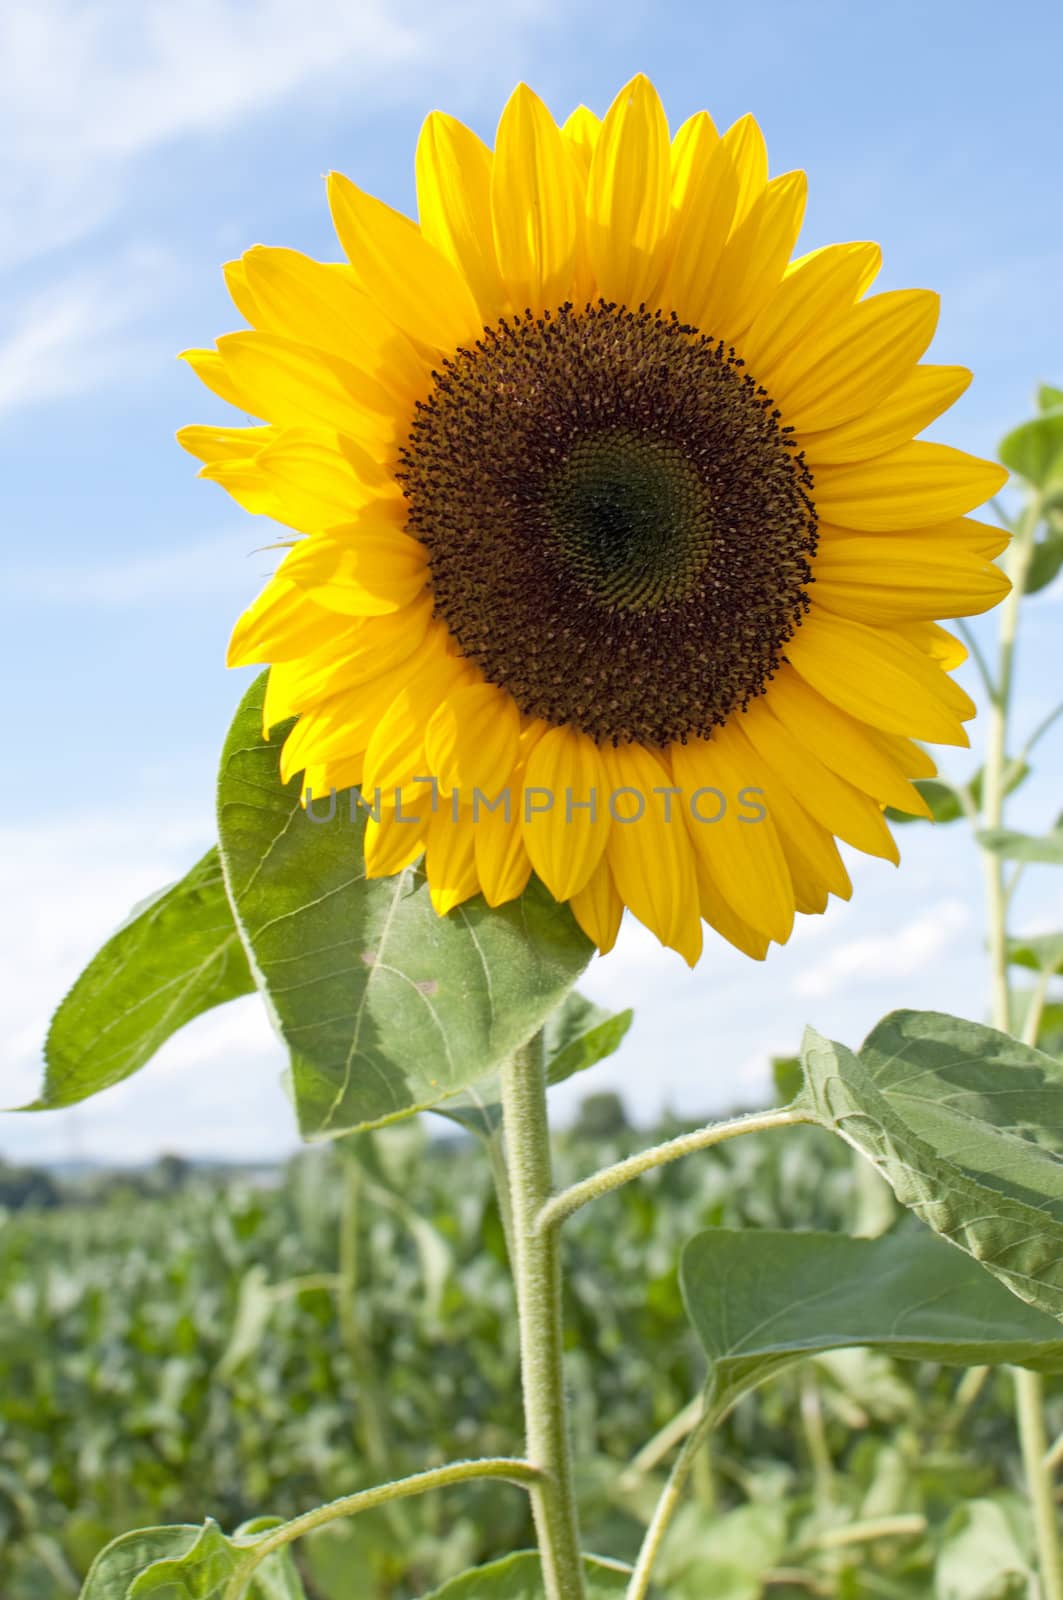 Beautiful Sunflower on the field against the blue sky